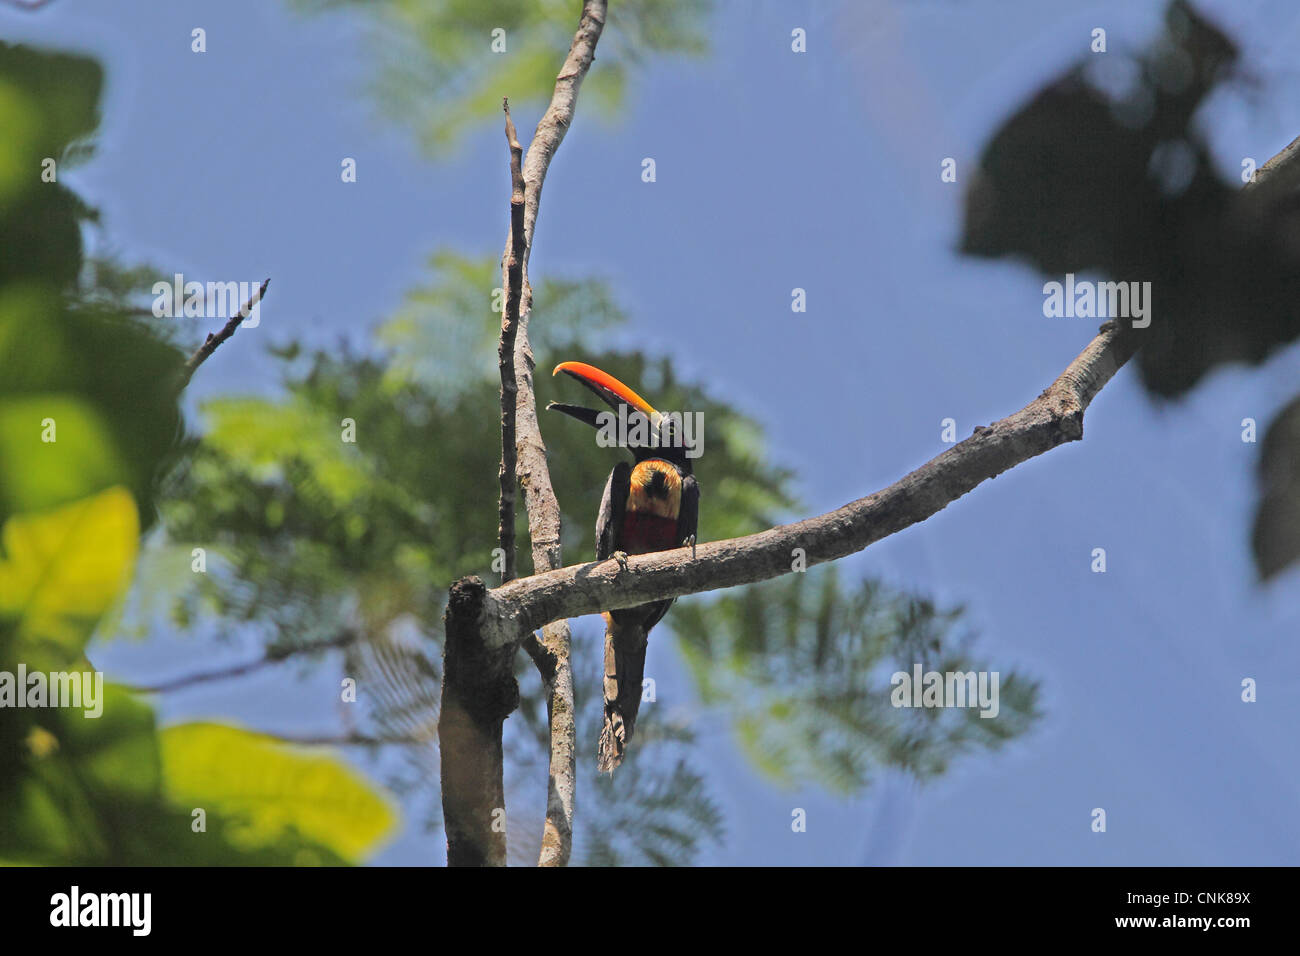 Fiery-billed Aracari (Pteroglossus frantzii) adult, calling, perched on branch in treetop, Costa Rica, february Stock Photo